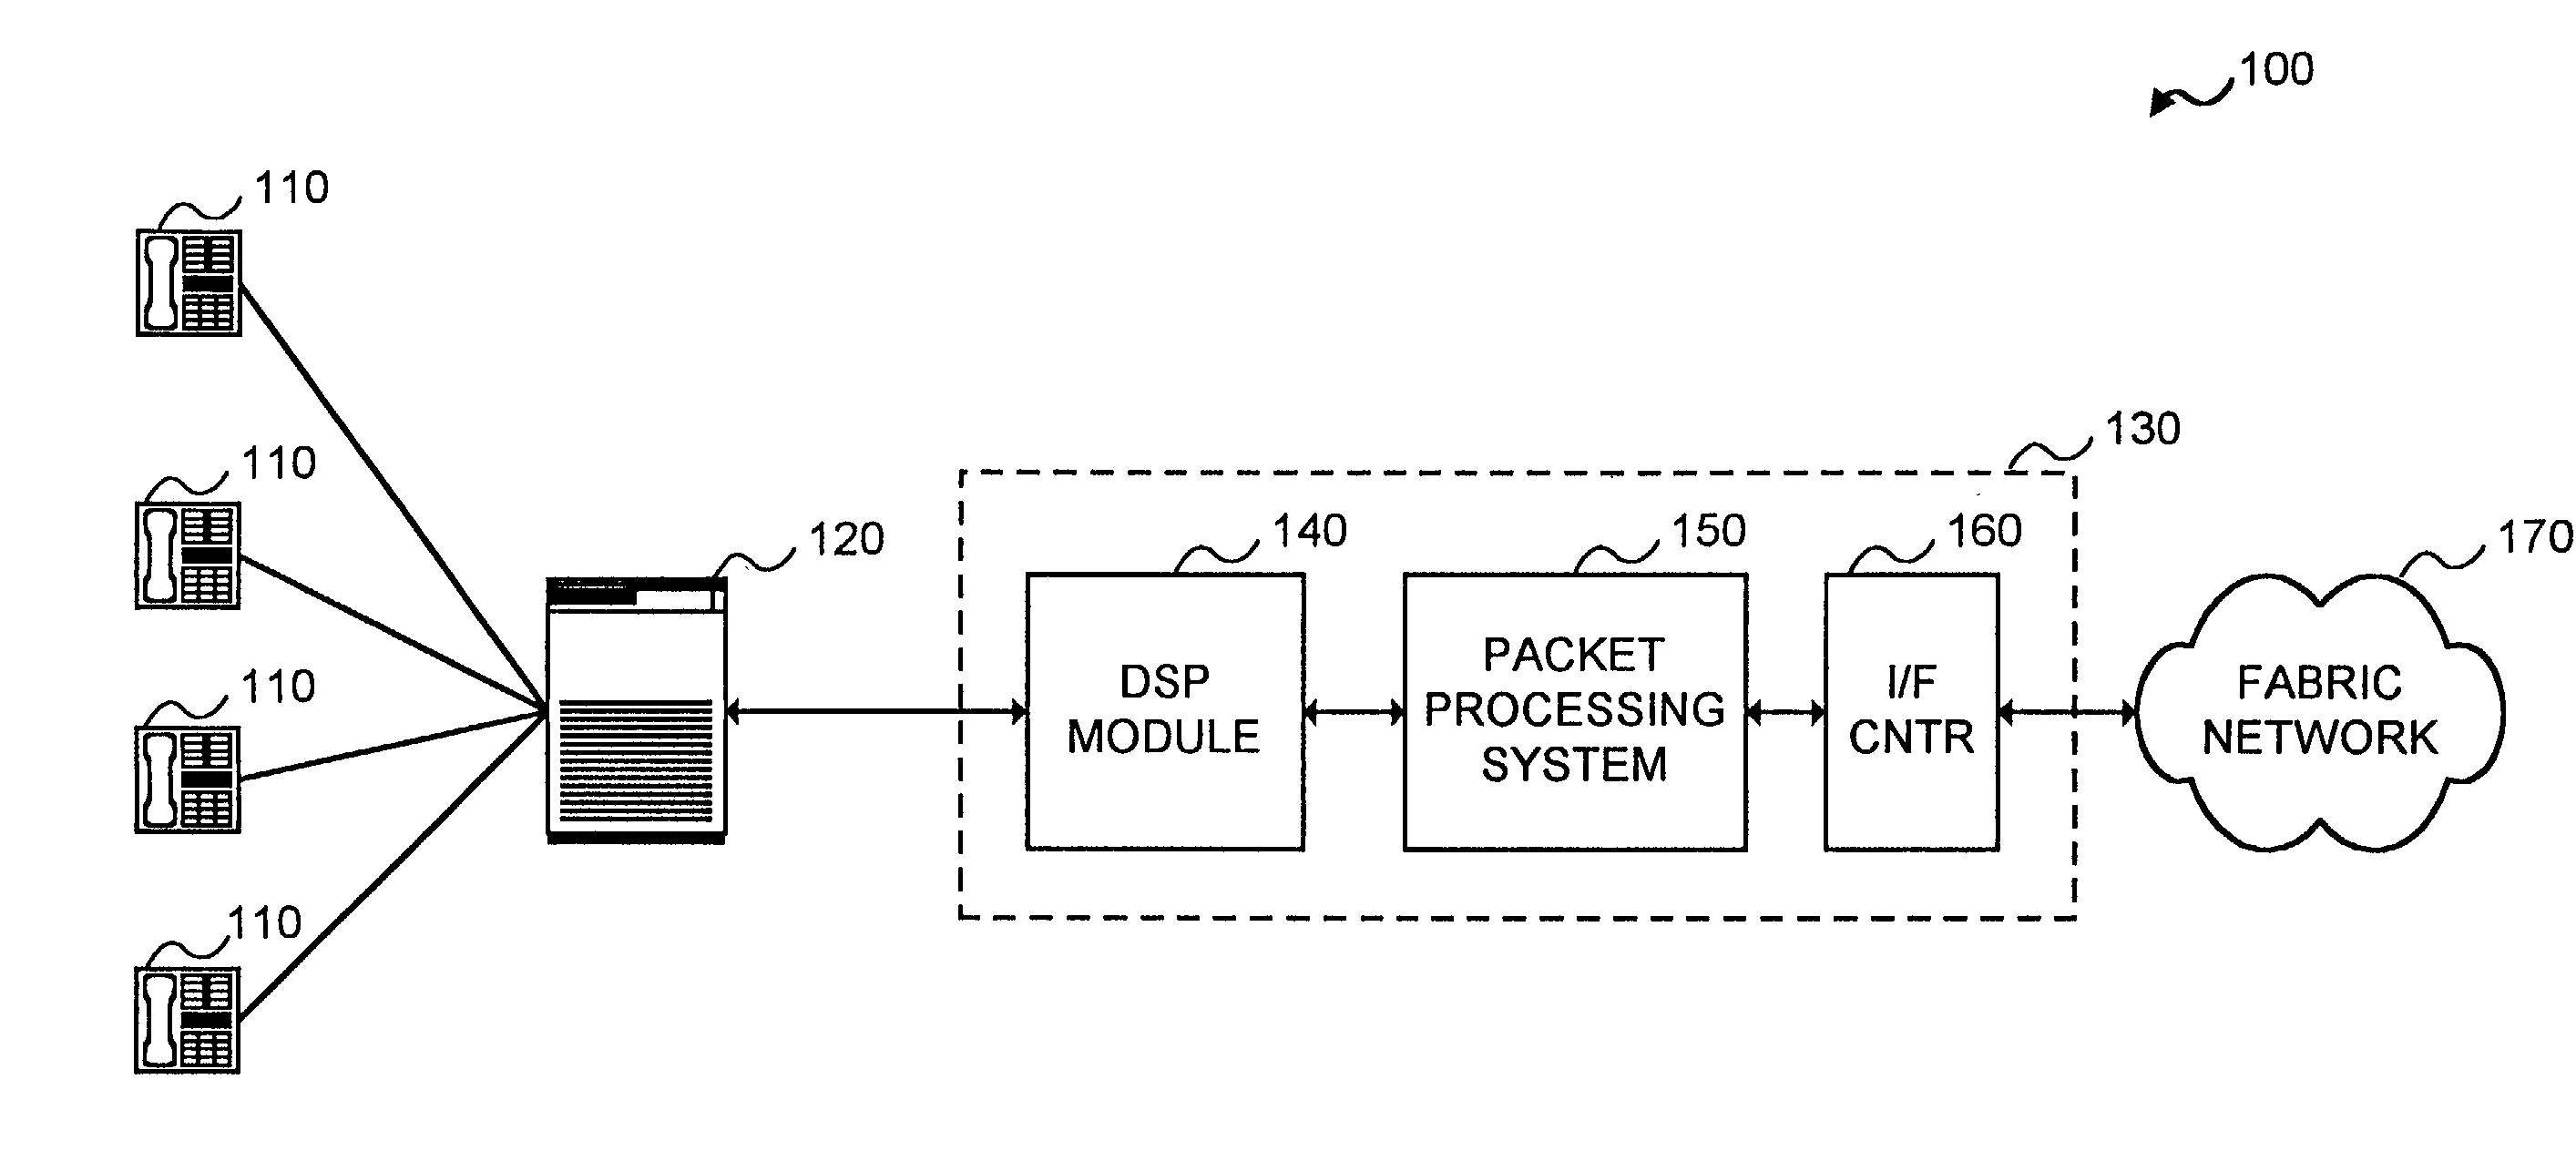 Voice packet processor and method of operation thereof